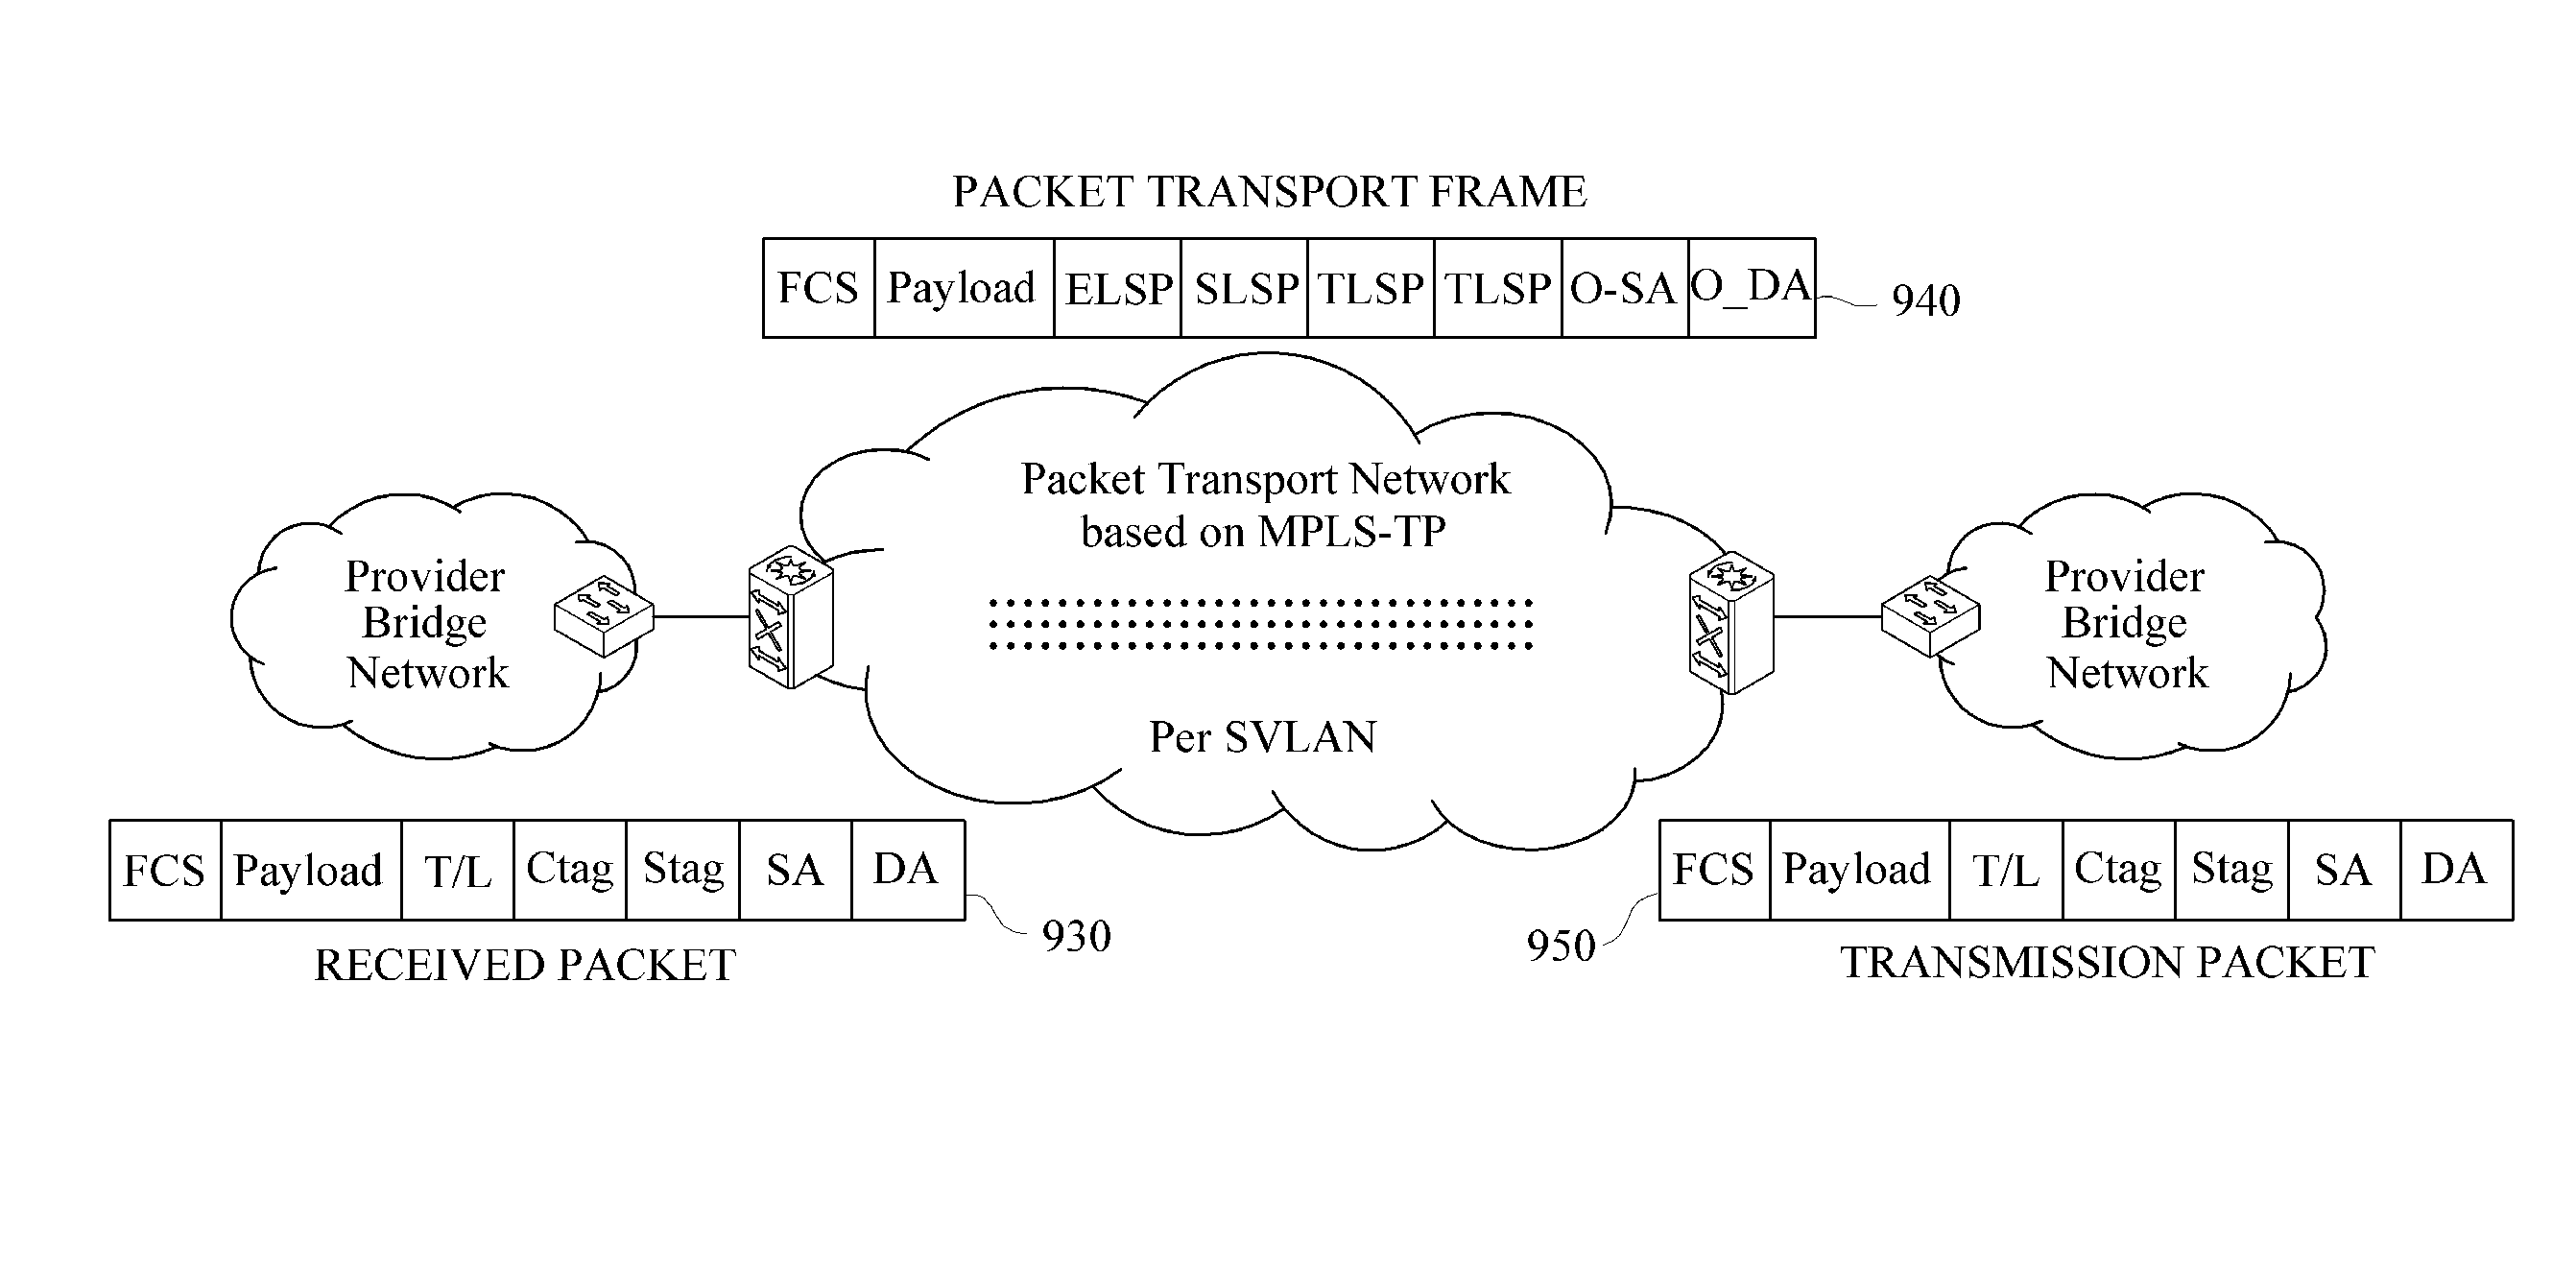 Apparatus and method for packet transport service based on multi protocol label switching-transport profile (mpls-tp) network